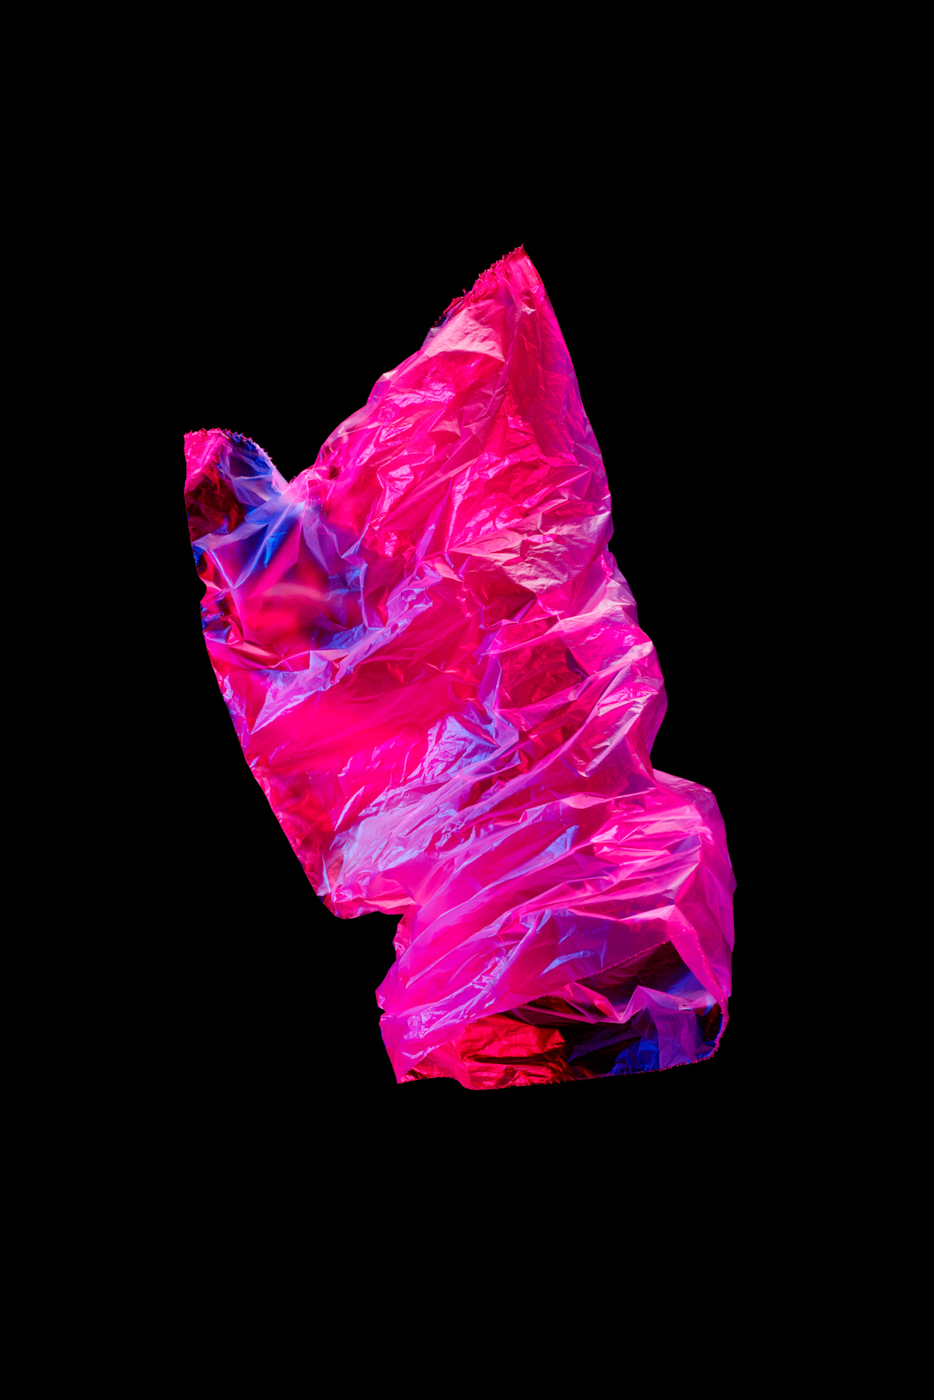 A_red_and_blue_lighted_plastic_bag_floating_in_the_air_with_a_black_background_by_Elina_Himanen